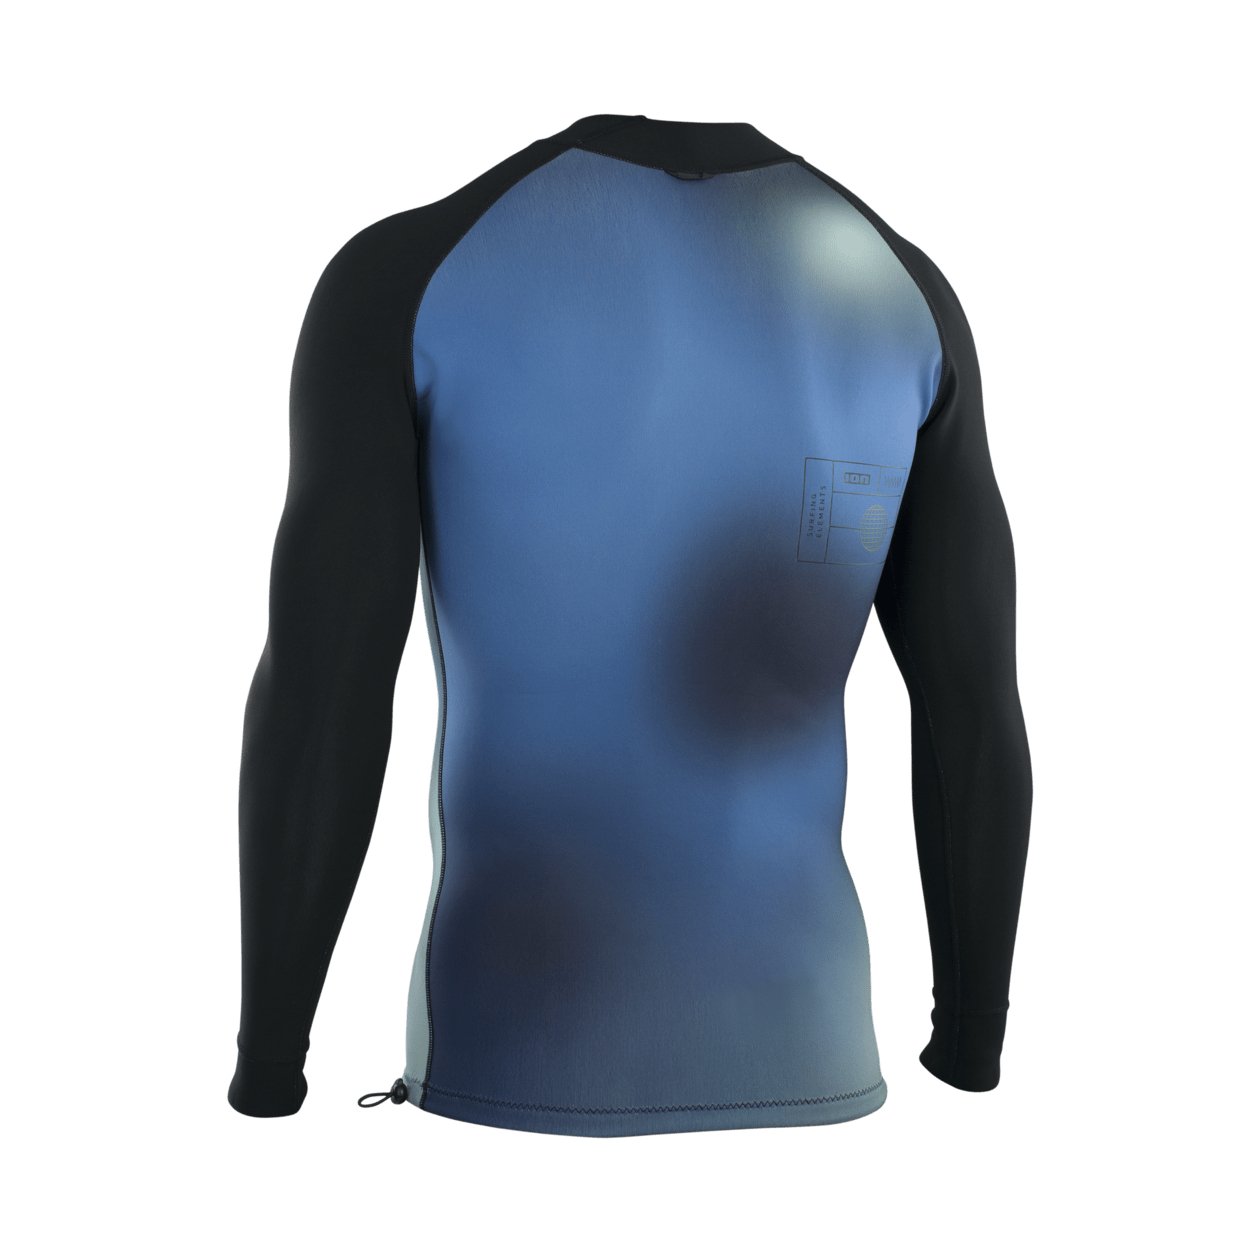 ION Neo Top 0.5 LS men 2023 - Worthing Watersports - 9010583091792 - Tops - ION Water